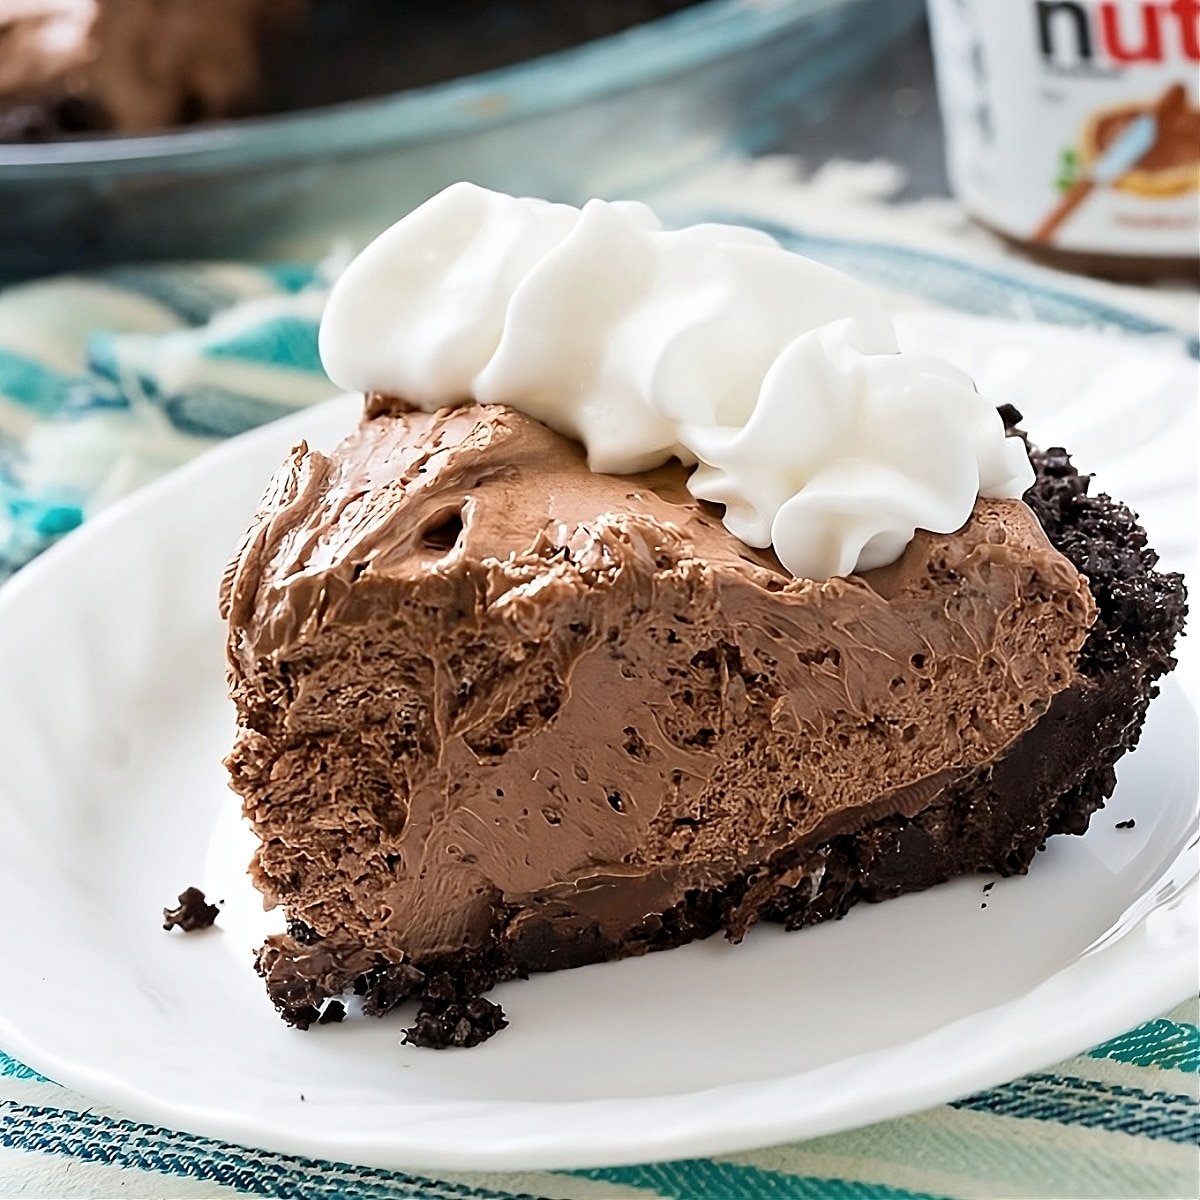 Slice of No-Bake Nutella Pie on a plate.